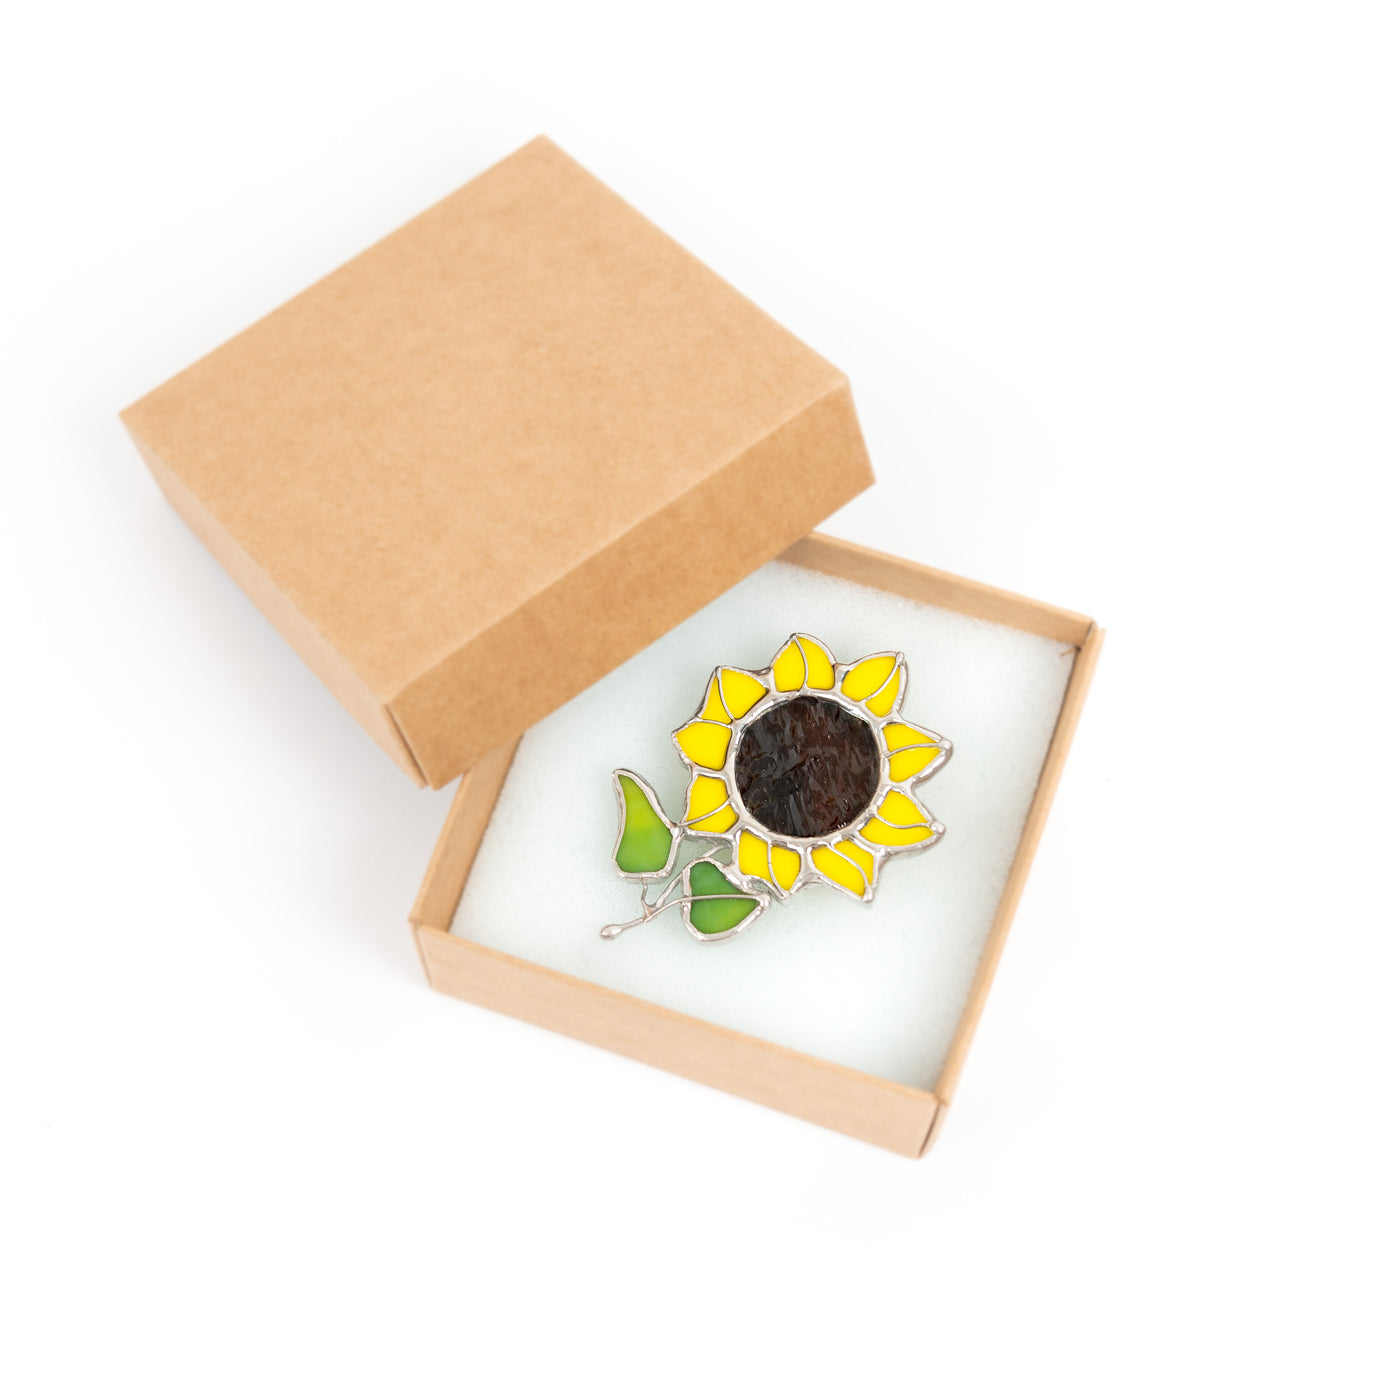 Sunflower pin stained glass pin in the box